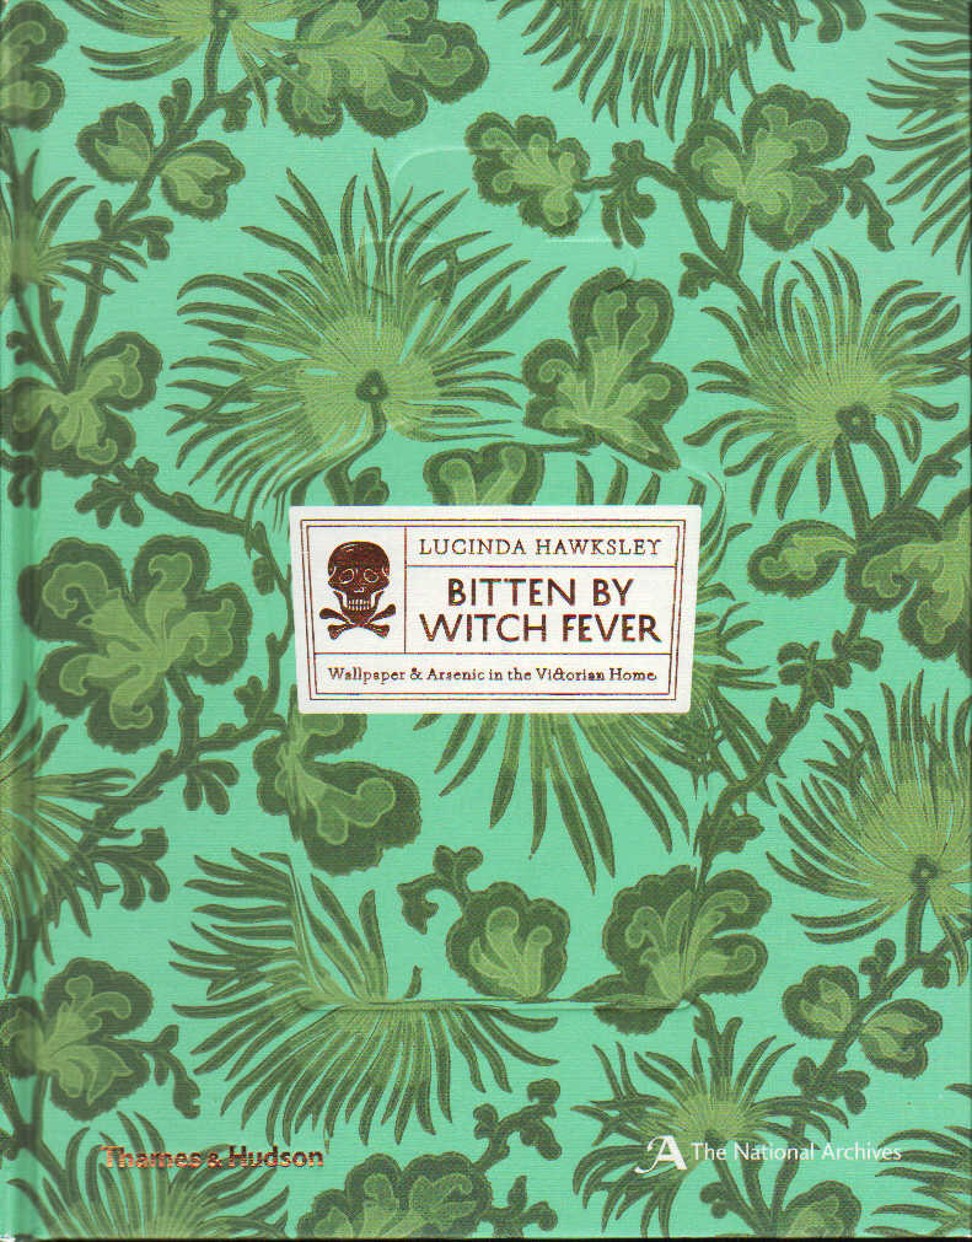 Bitten by Witch Fever: Wallpaper & Arsenic in the Victorian Home by Lucinda Hawksley.